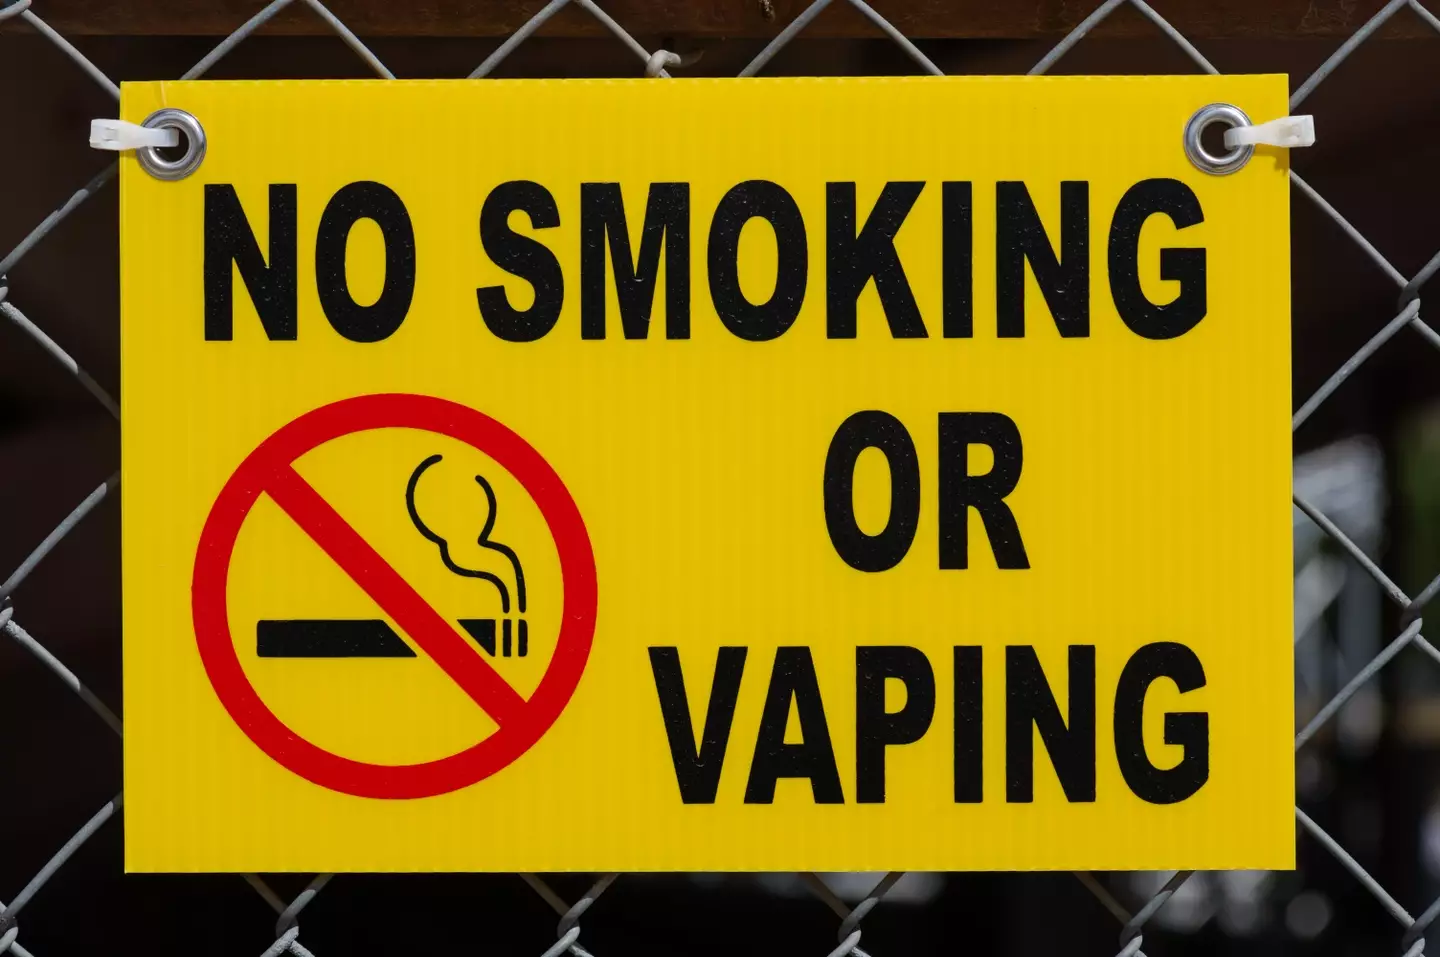 In recent years restrictions on vape ingredients has come into force.